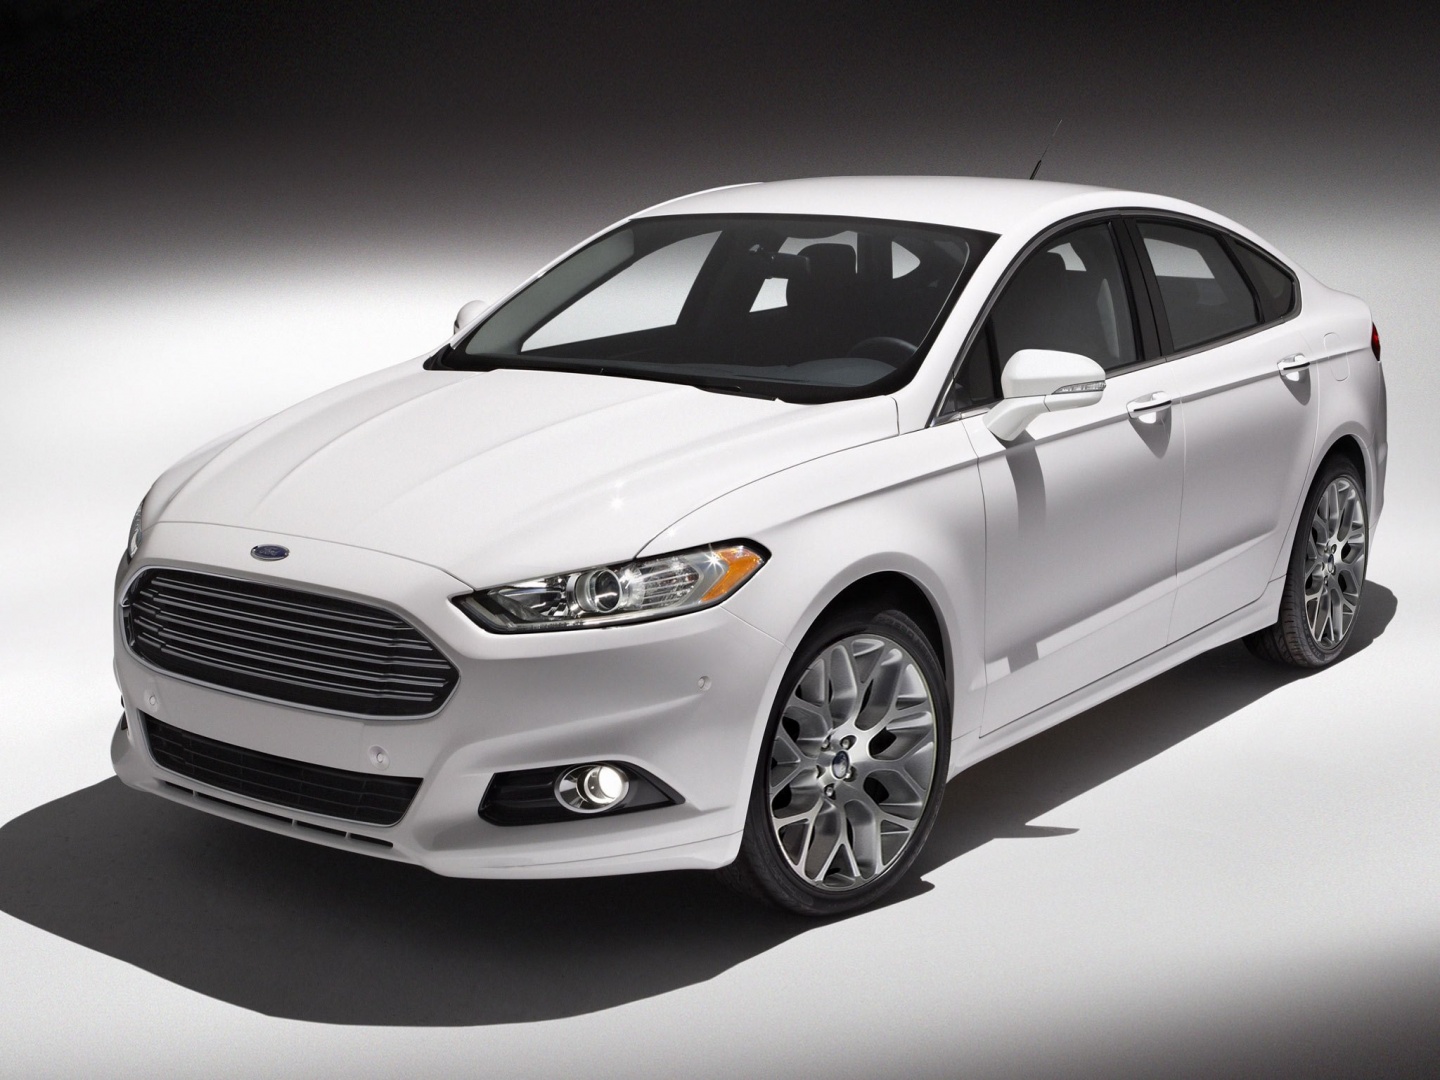 Ford fusion wallpaper download #6